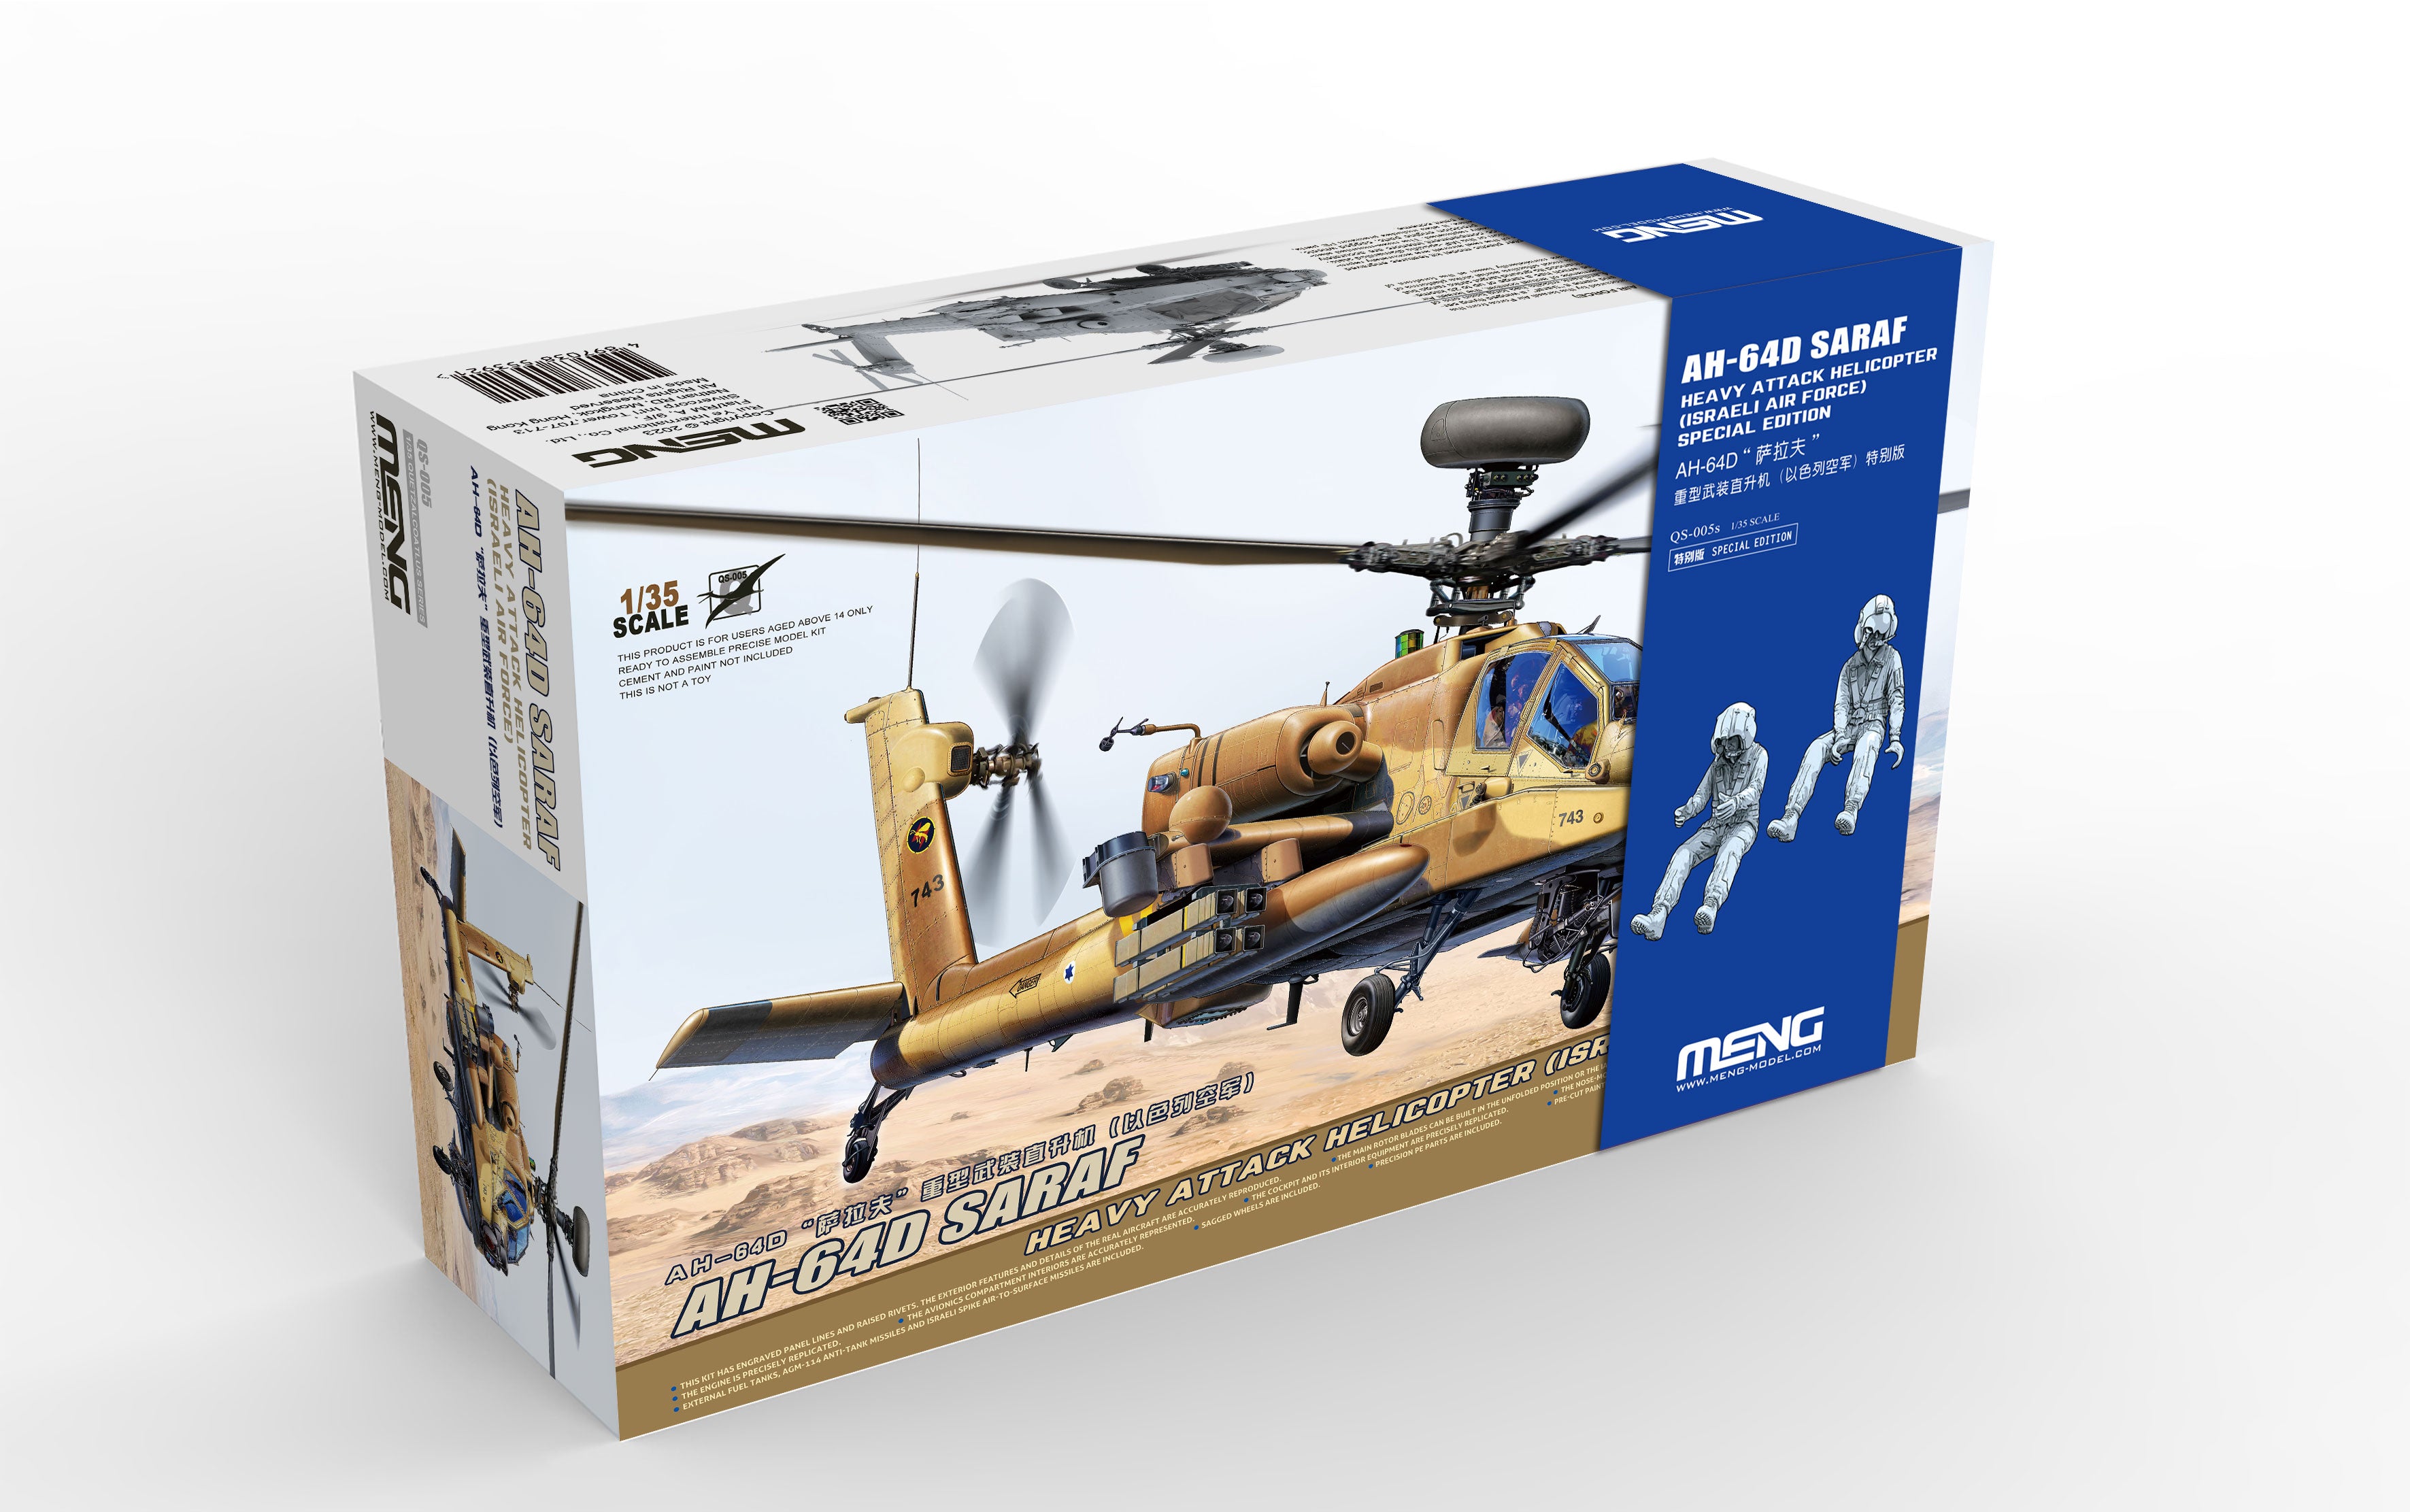 Meng: 1/35 AH-64D SARAF Saraph (Fiery Winged Serpent) Special Edition (incl. Two Resin figures)